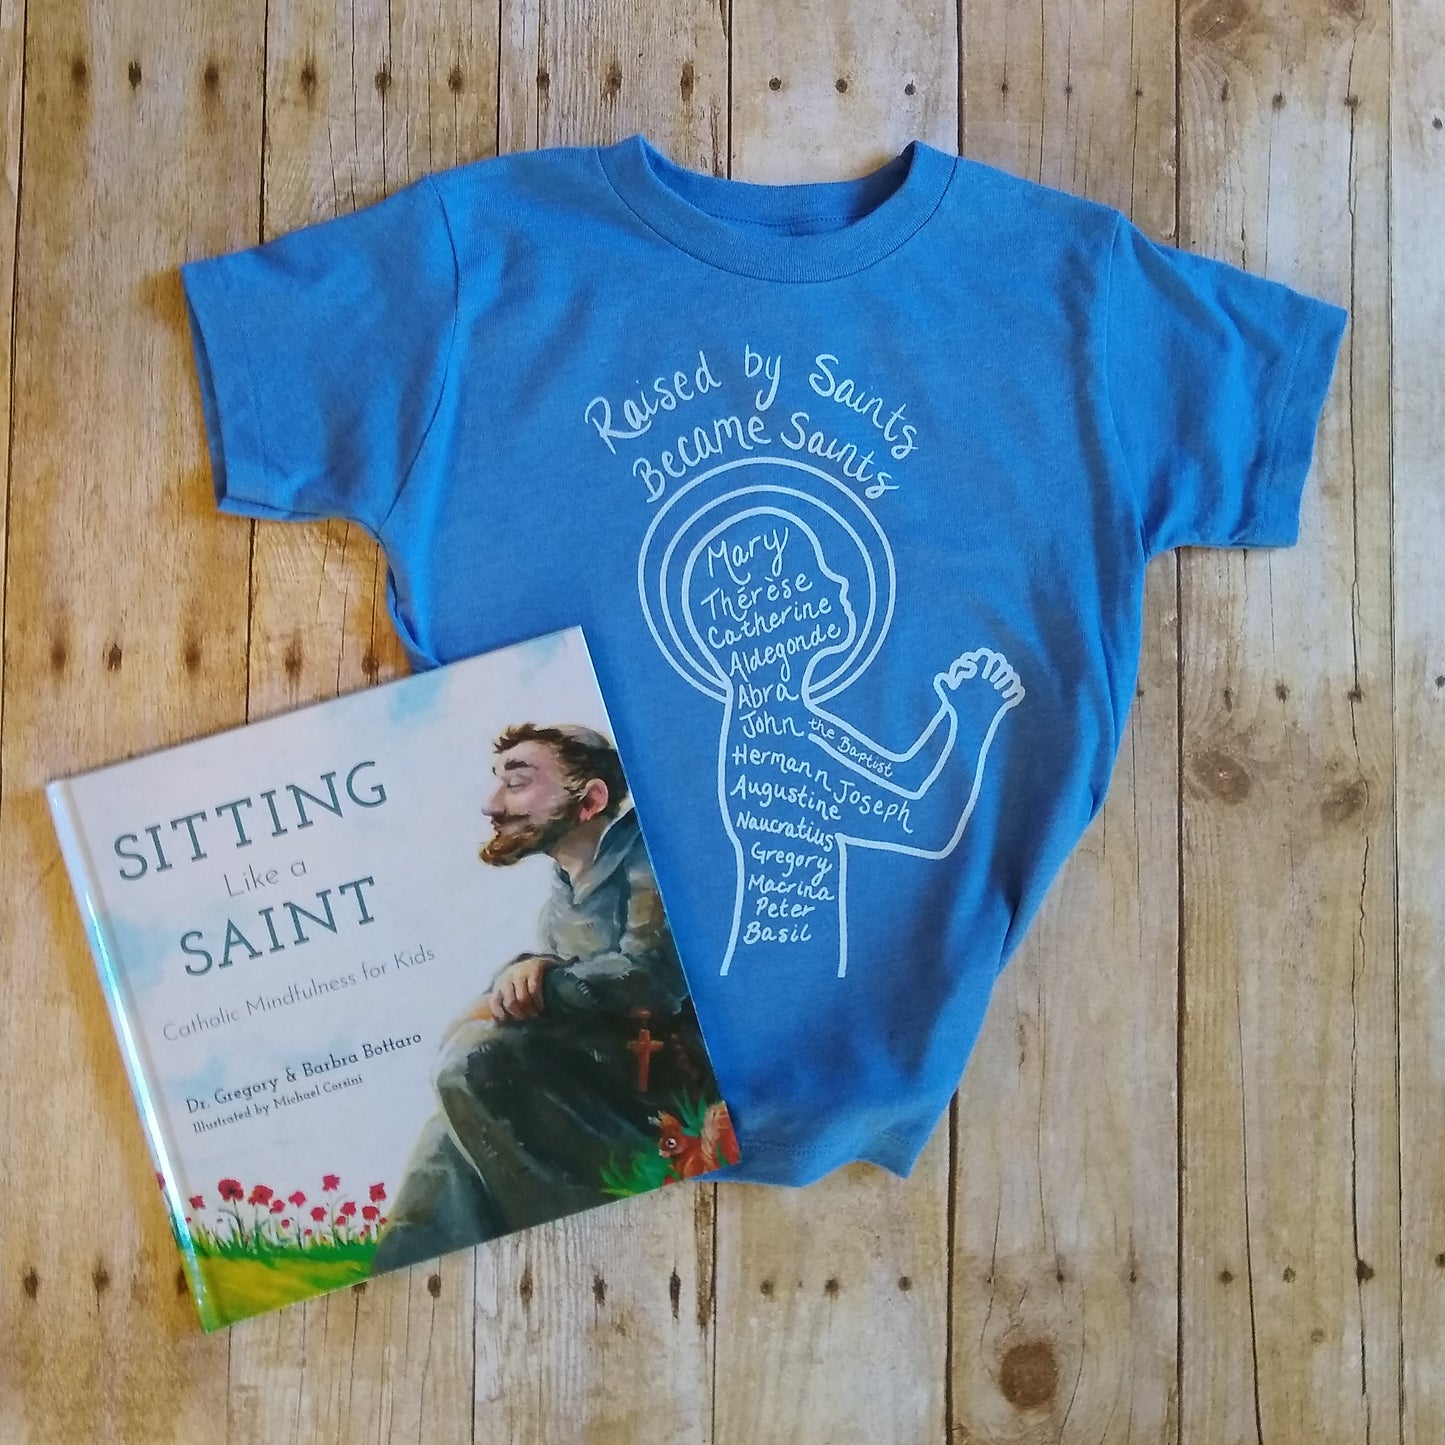 Raised by Saints, Became Saints Toddler Tee (Blue)